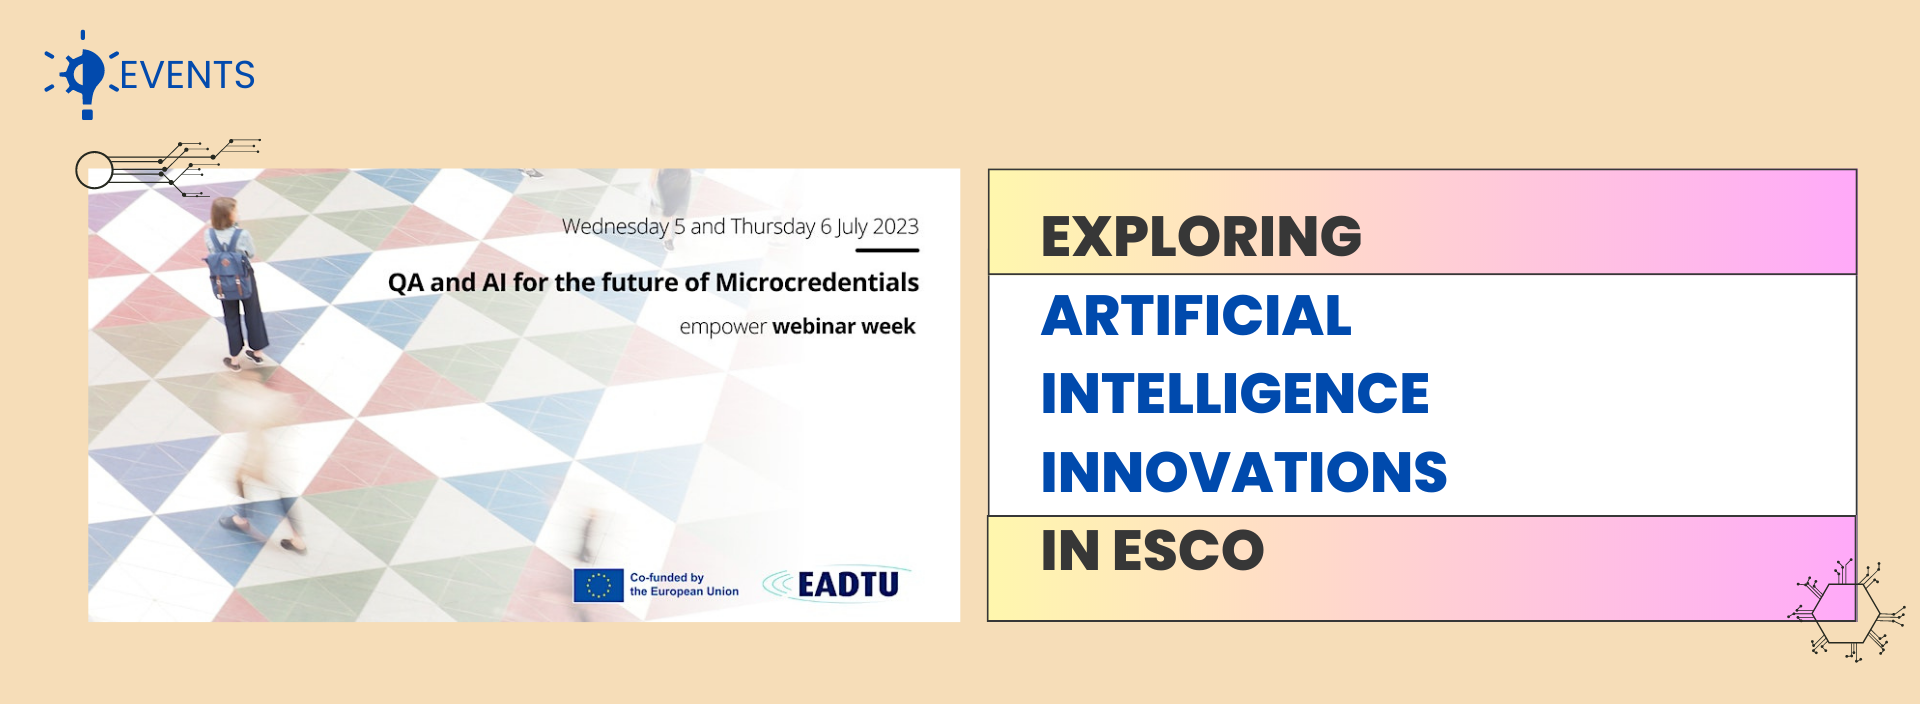 Image repeating the title of the News article in case ESCO presented in the Empower webinar week: QA and AI for the future of Microcredentials